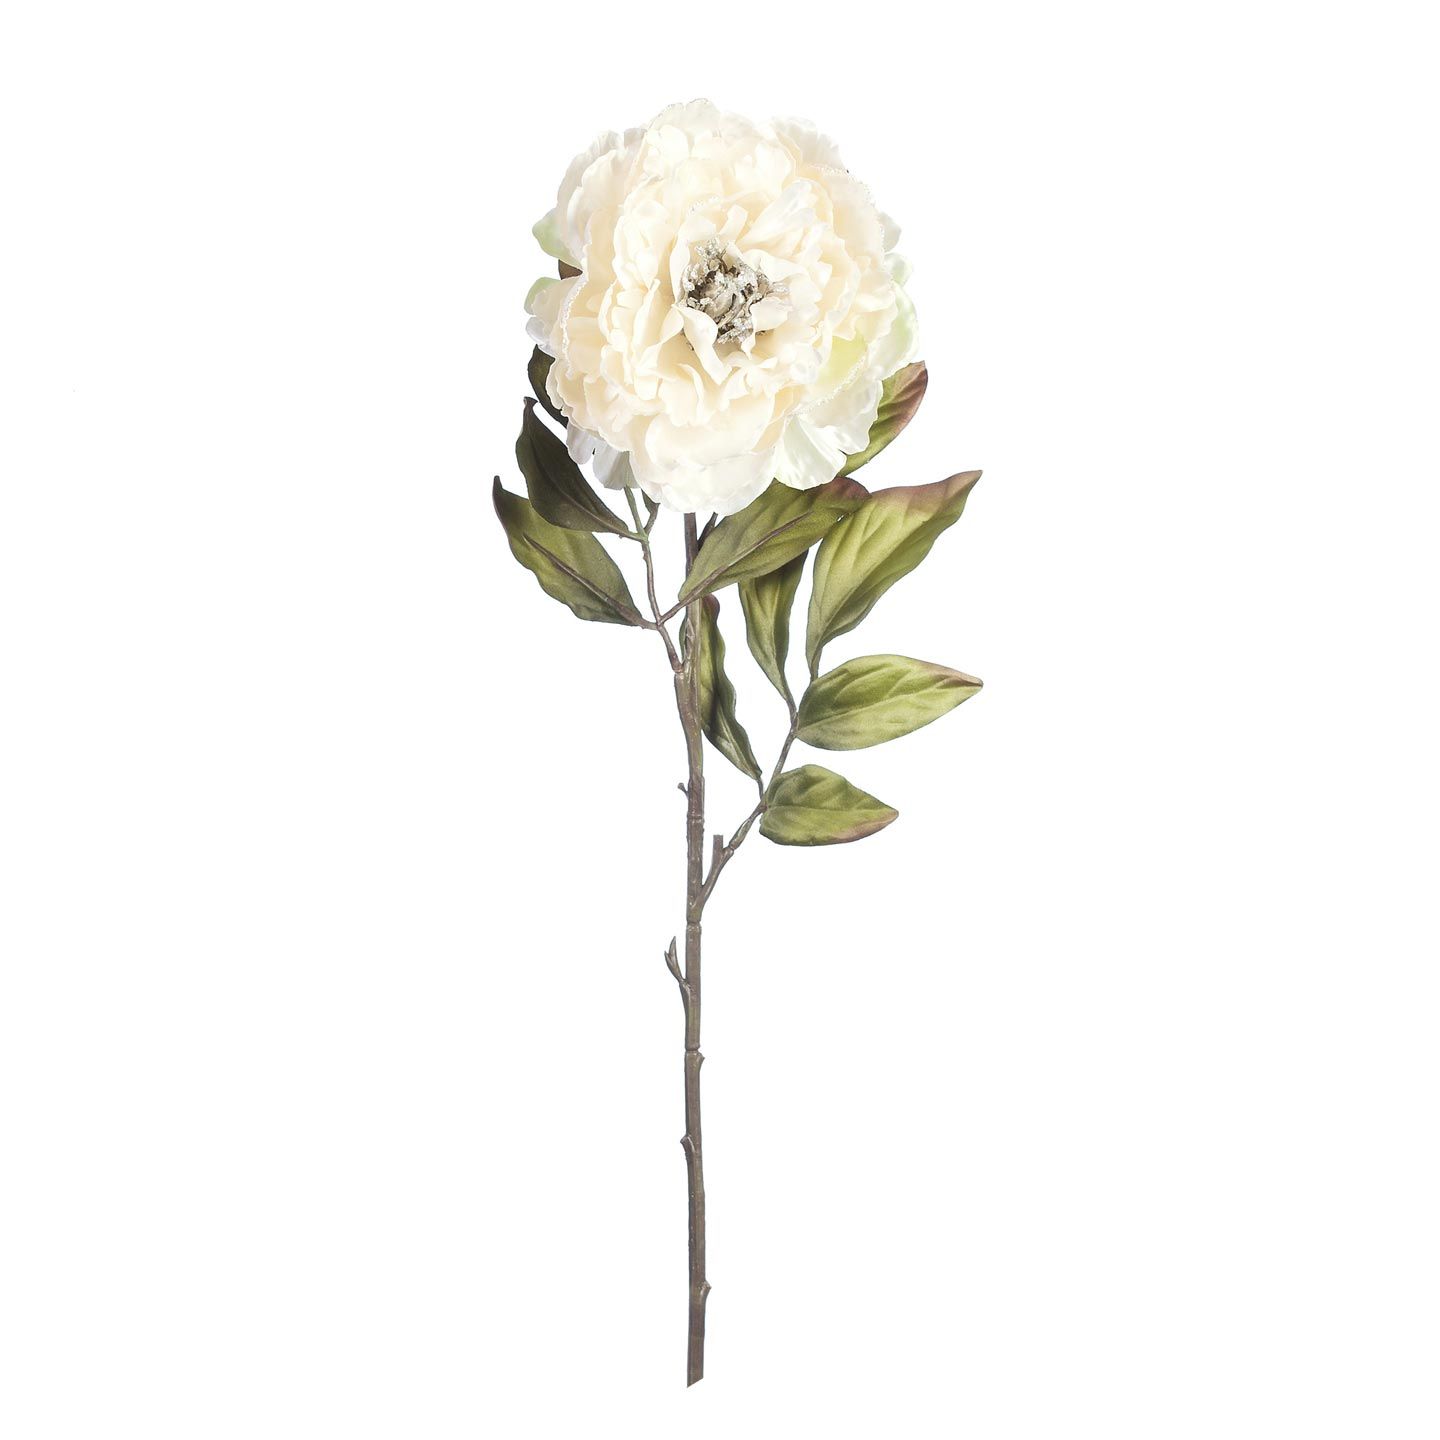 Darice Faux Pastel Peony Spray with Glitter Accents, 26 inches | Walmart (US)